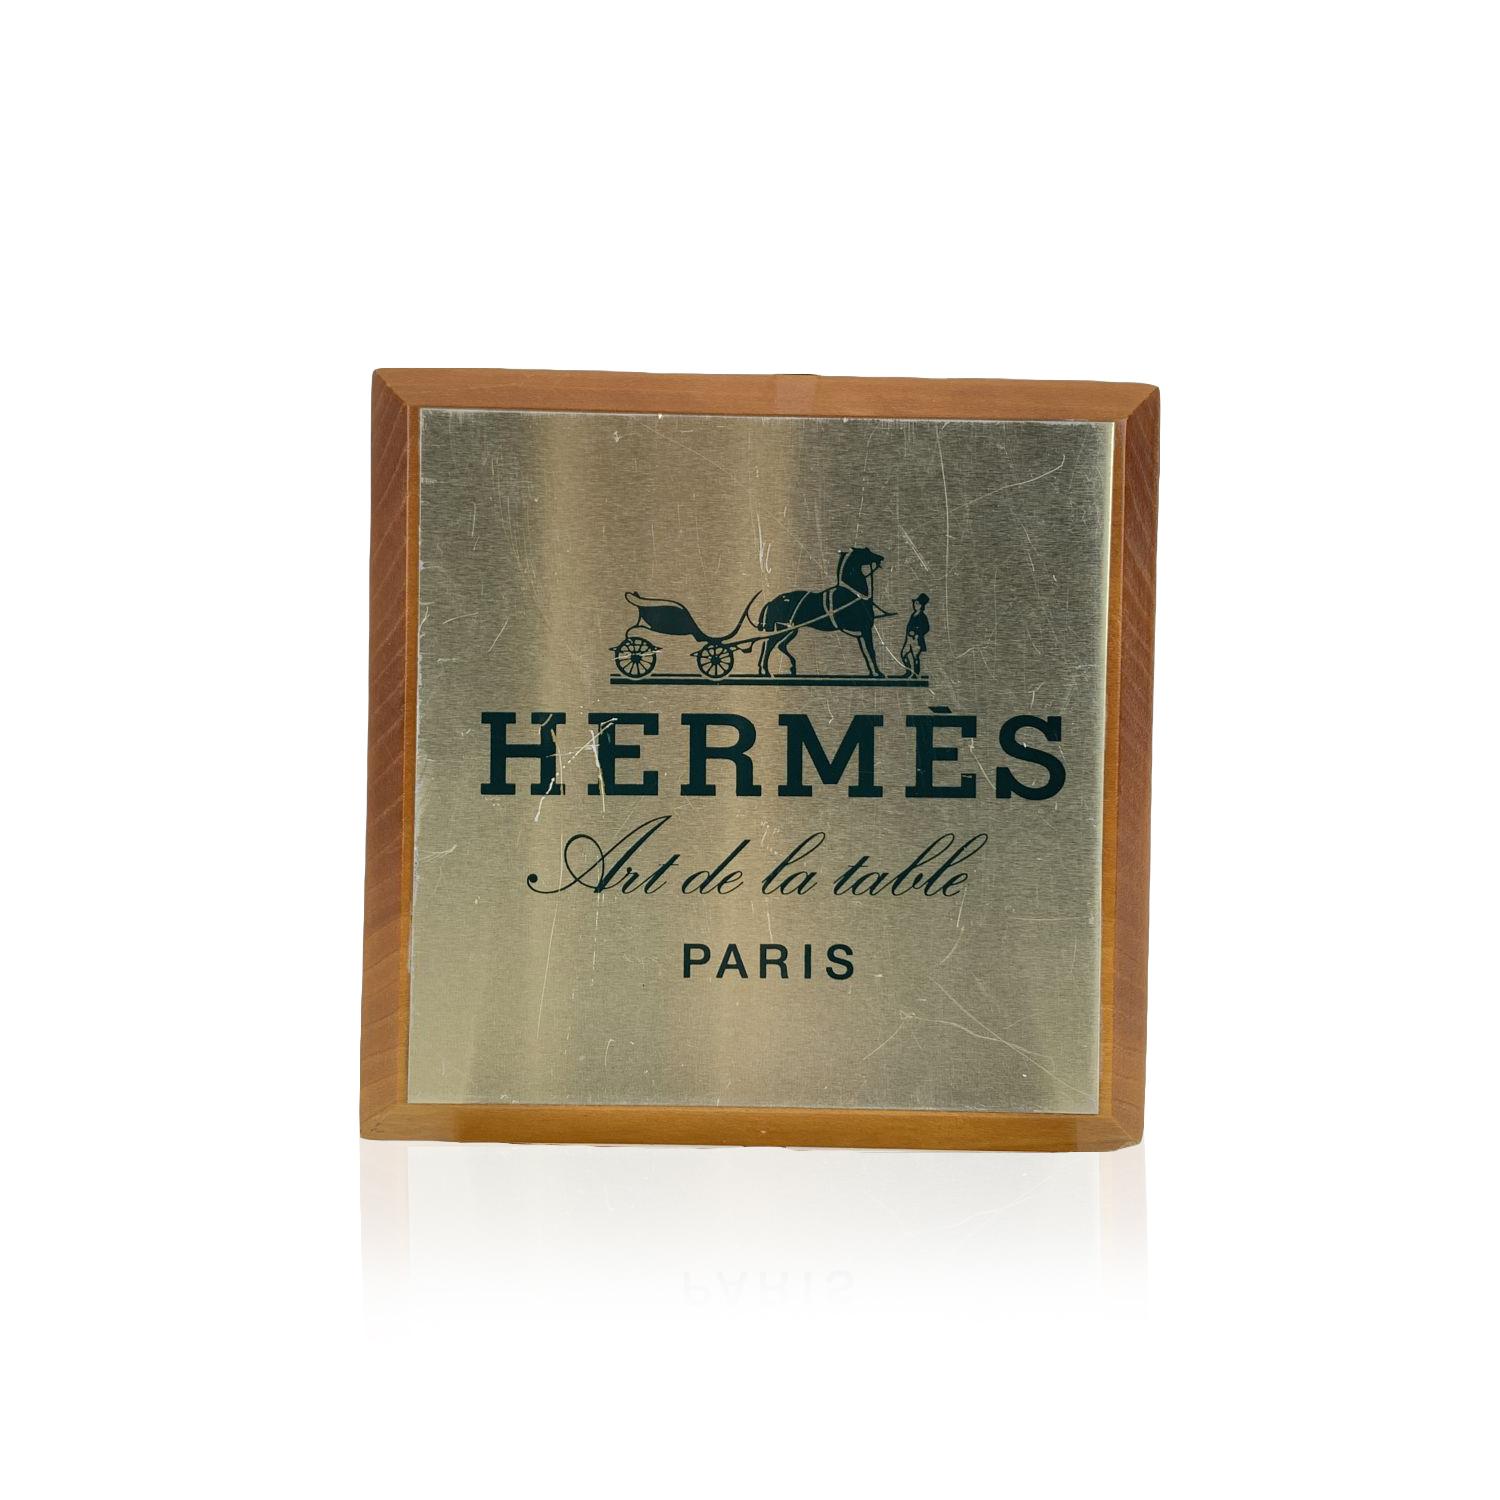 Vintage Hermes Shelf talker/Plate with 'Hermes Art de la table - Paris' lettering. Square-shaped. Made in wood, with upper side in light gold colored metal. Measurements: 6.5 x 6.5 inches - 16,5 x 16,5 cm

Details

MATERIAL: Wood

COLOR: